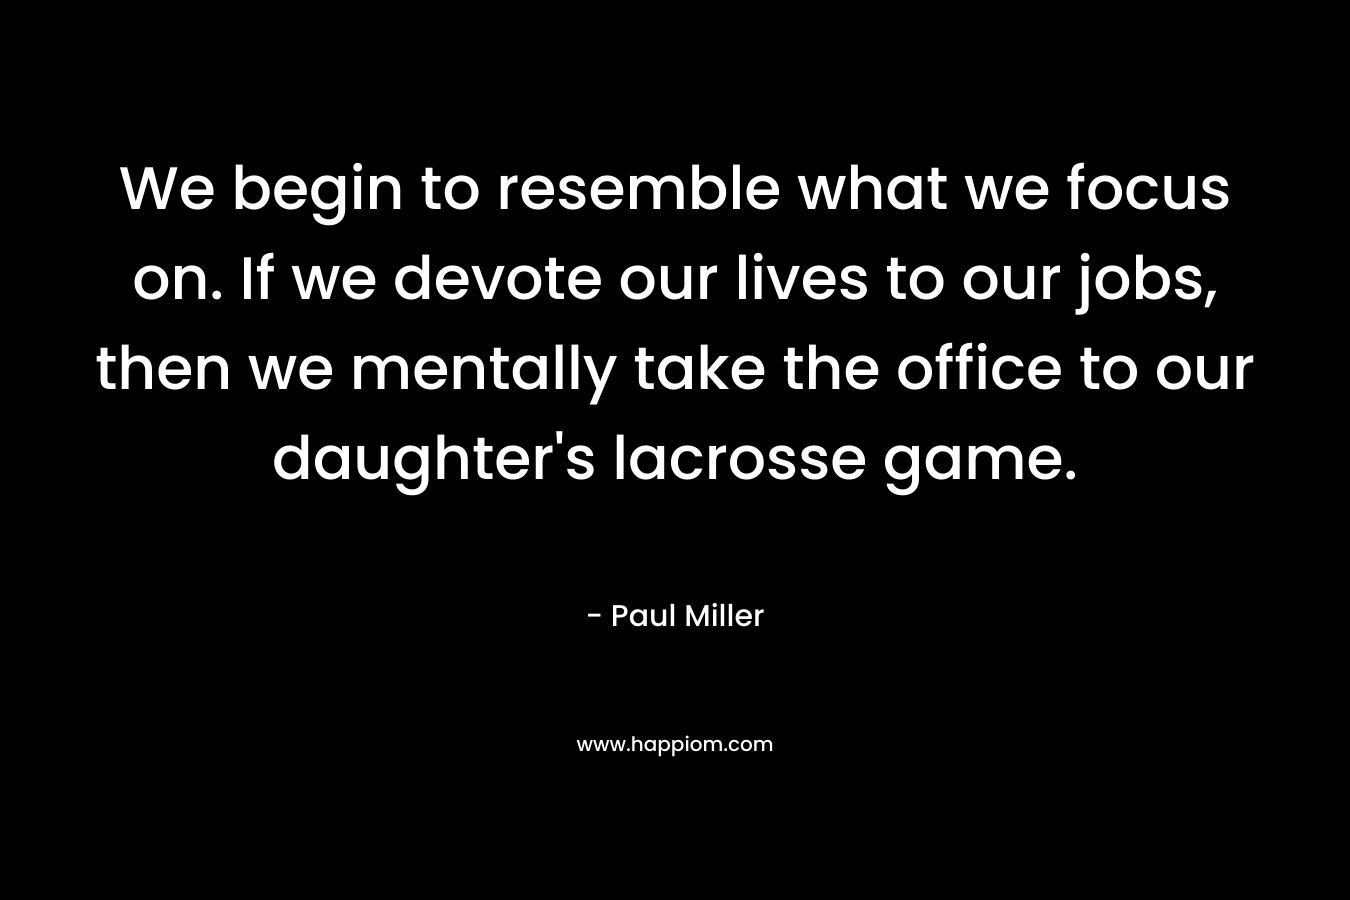 We begin to resemble what we focus on. If we devote our lives to our jobs, then we mentally take the office to our daughter’s lacrosse game. – Paul Miller